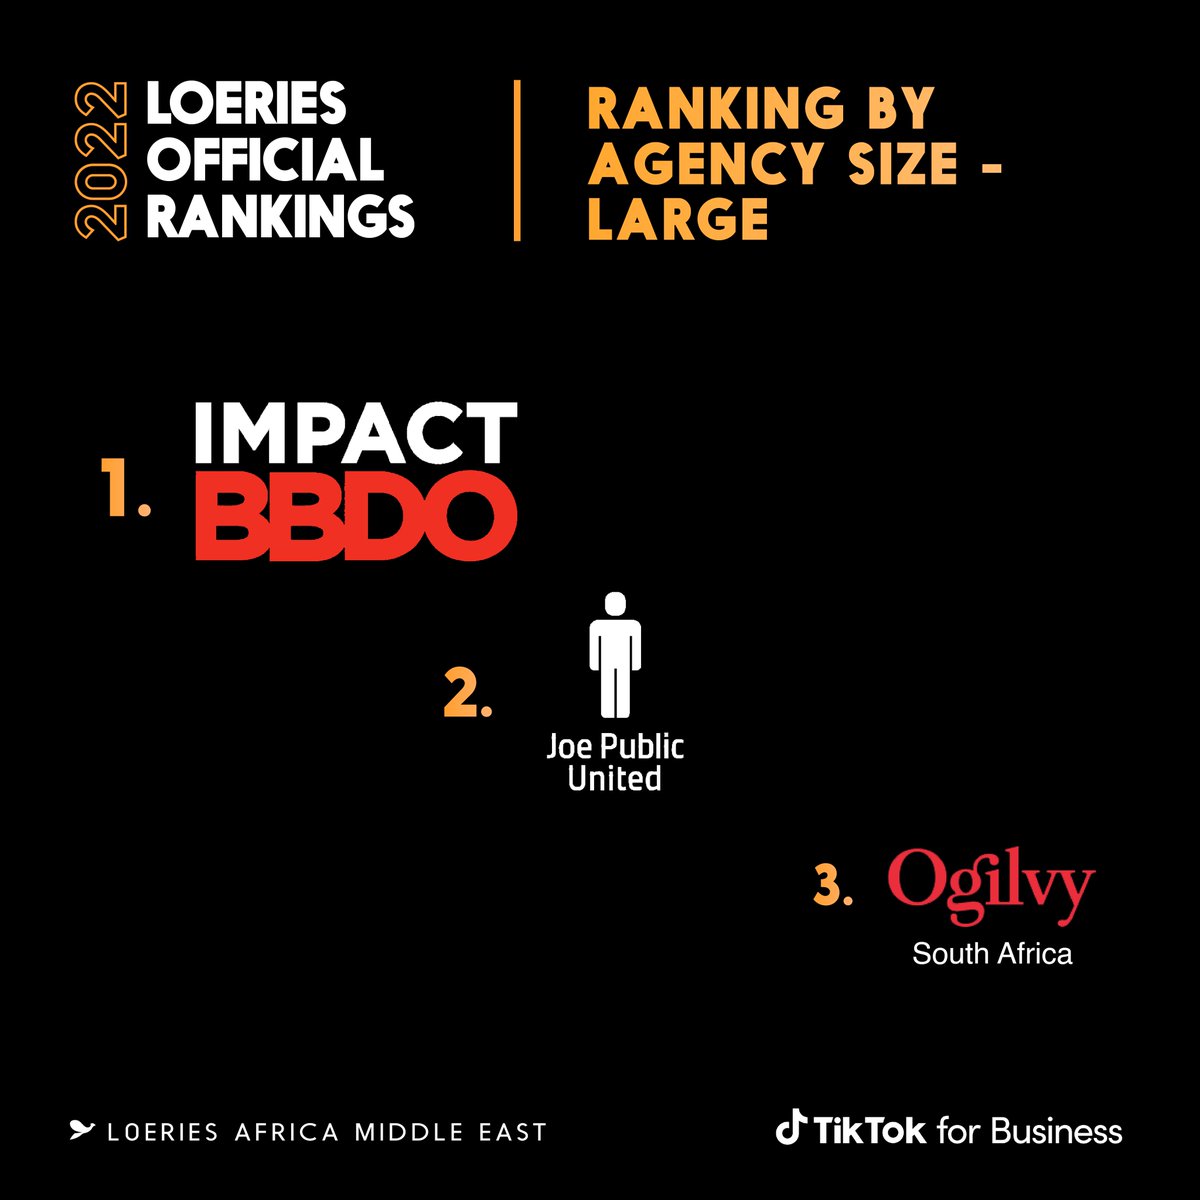 It is with great delight that The Loerie Awards congratulate the top-ranking Large agencies in the region. #Loeries #LoeriesOfficialRankings2022 #creativity